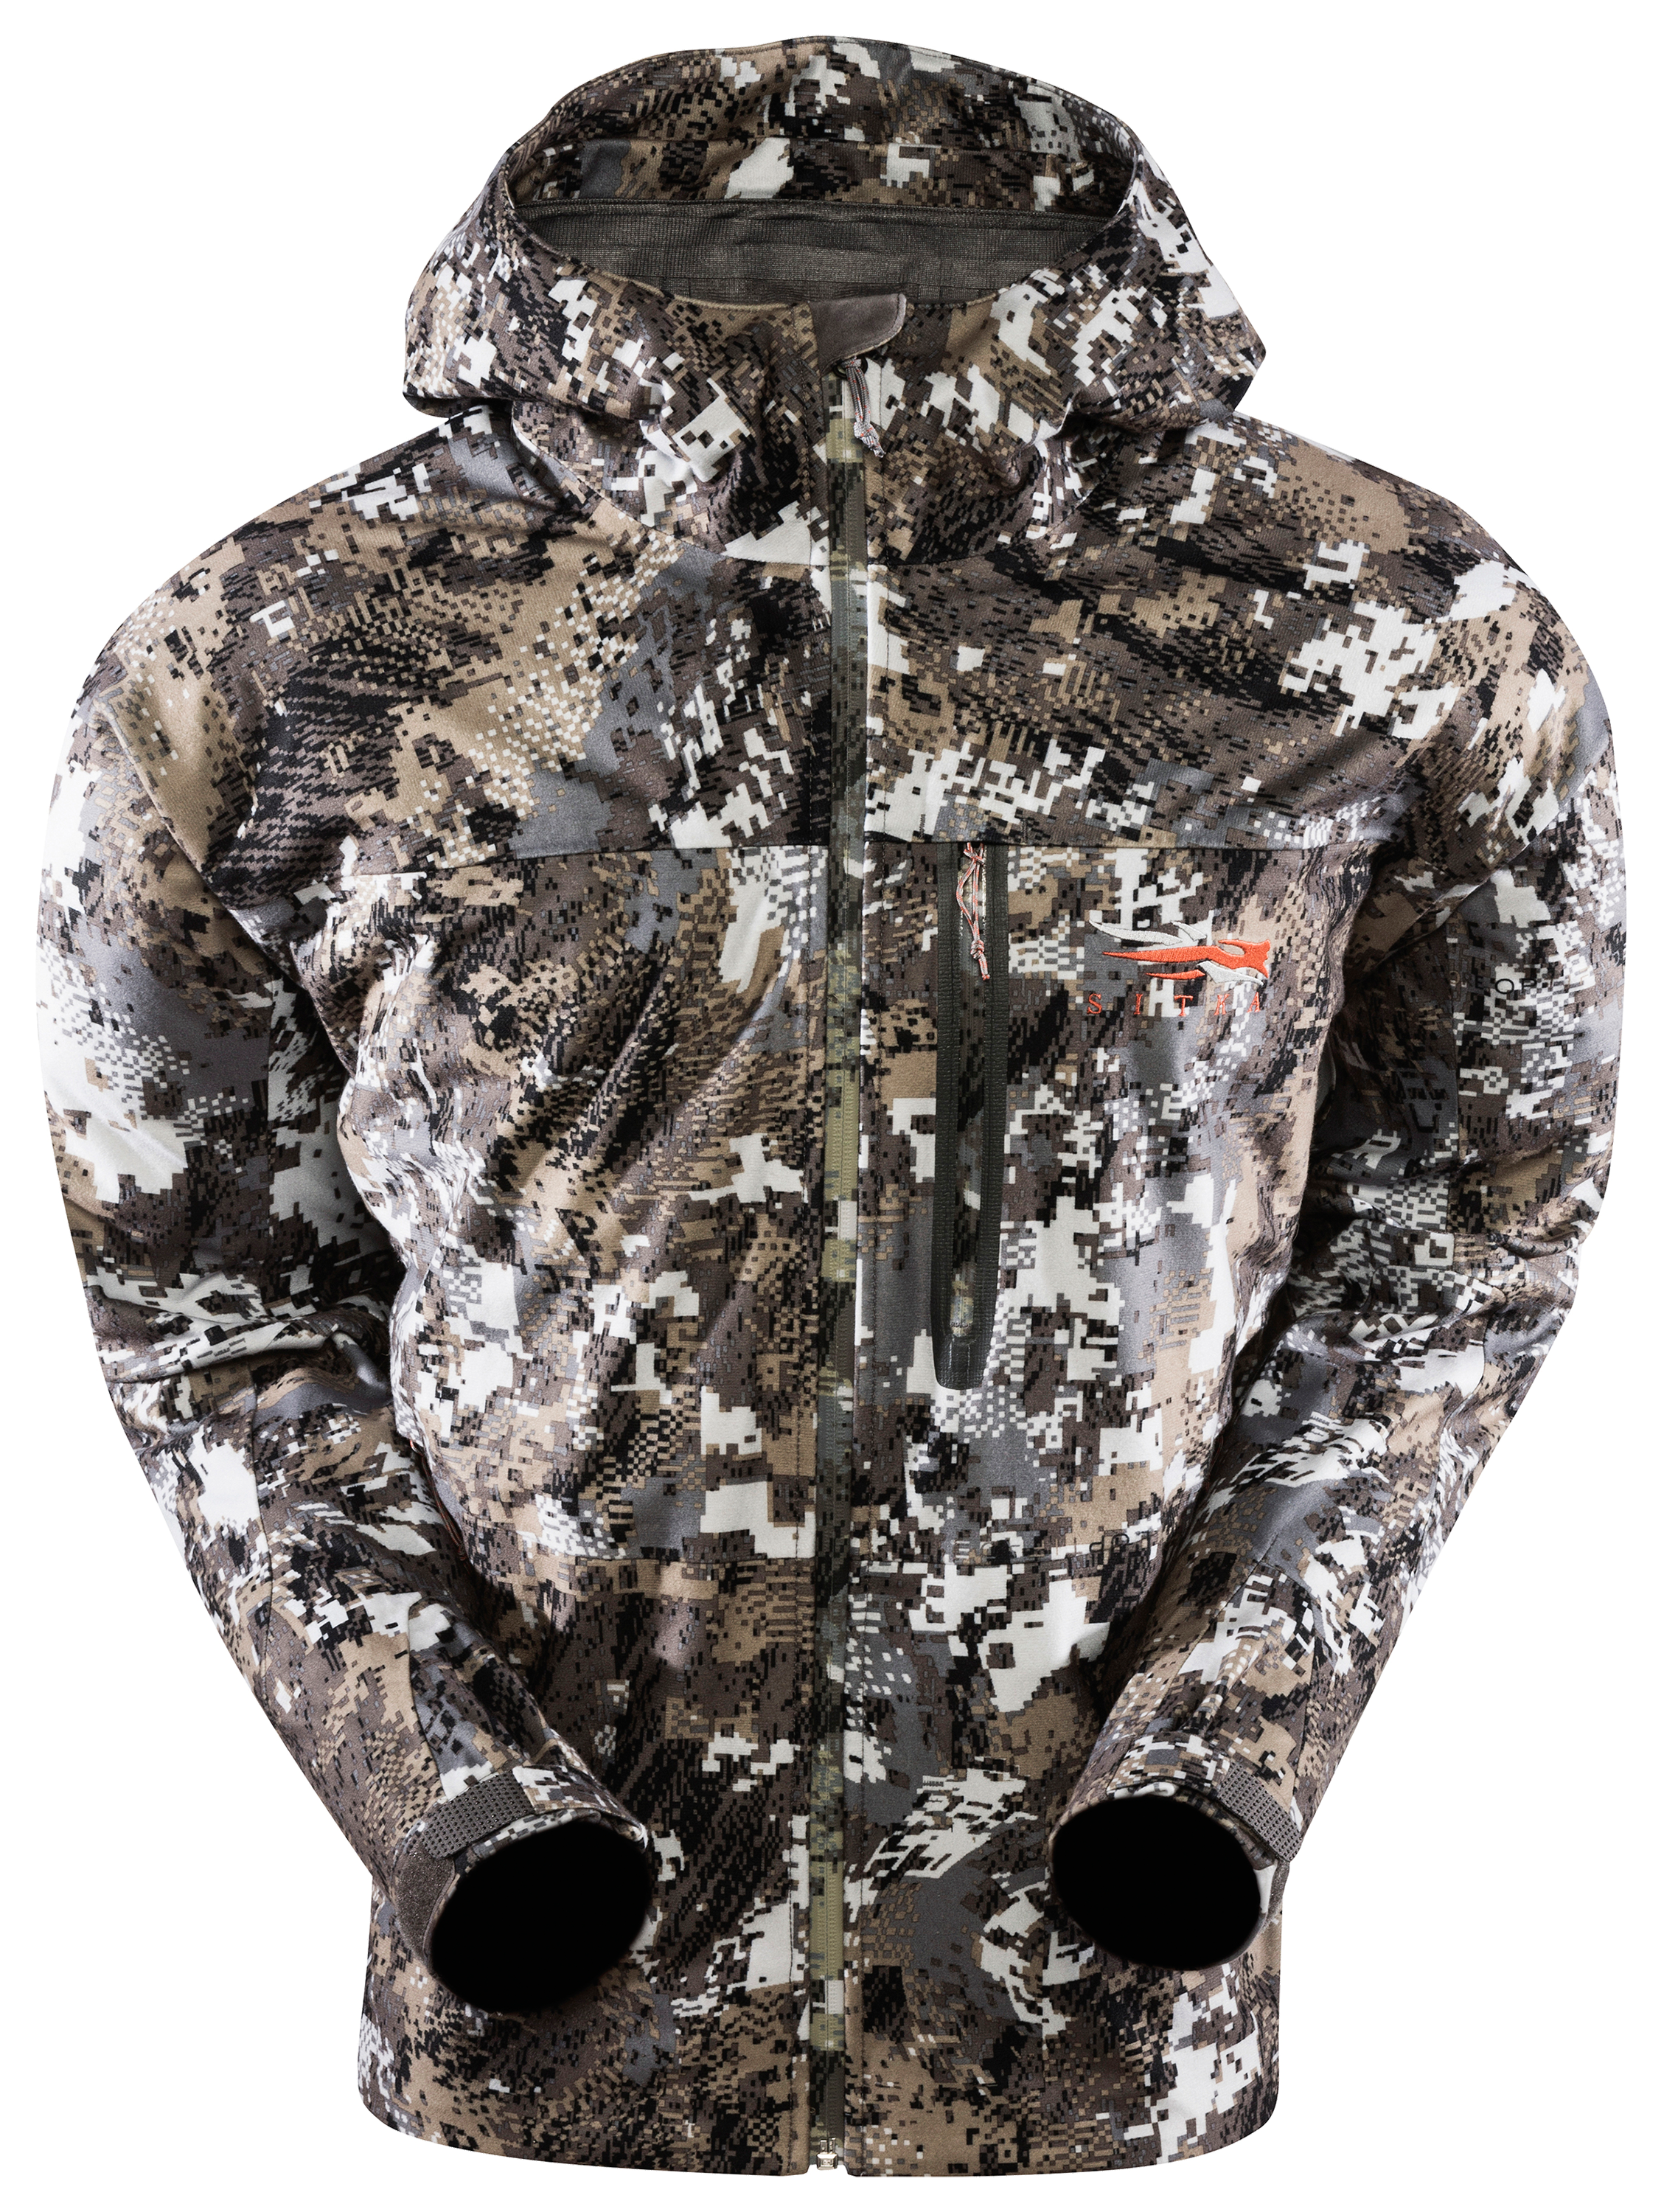 Sitka GORE OPTIFADE Elevated II Downpour Jacket for Men